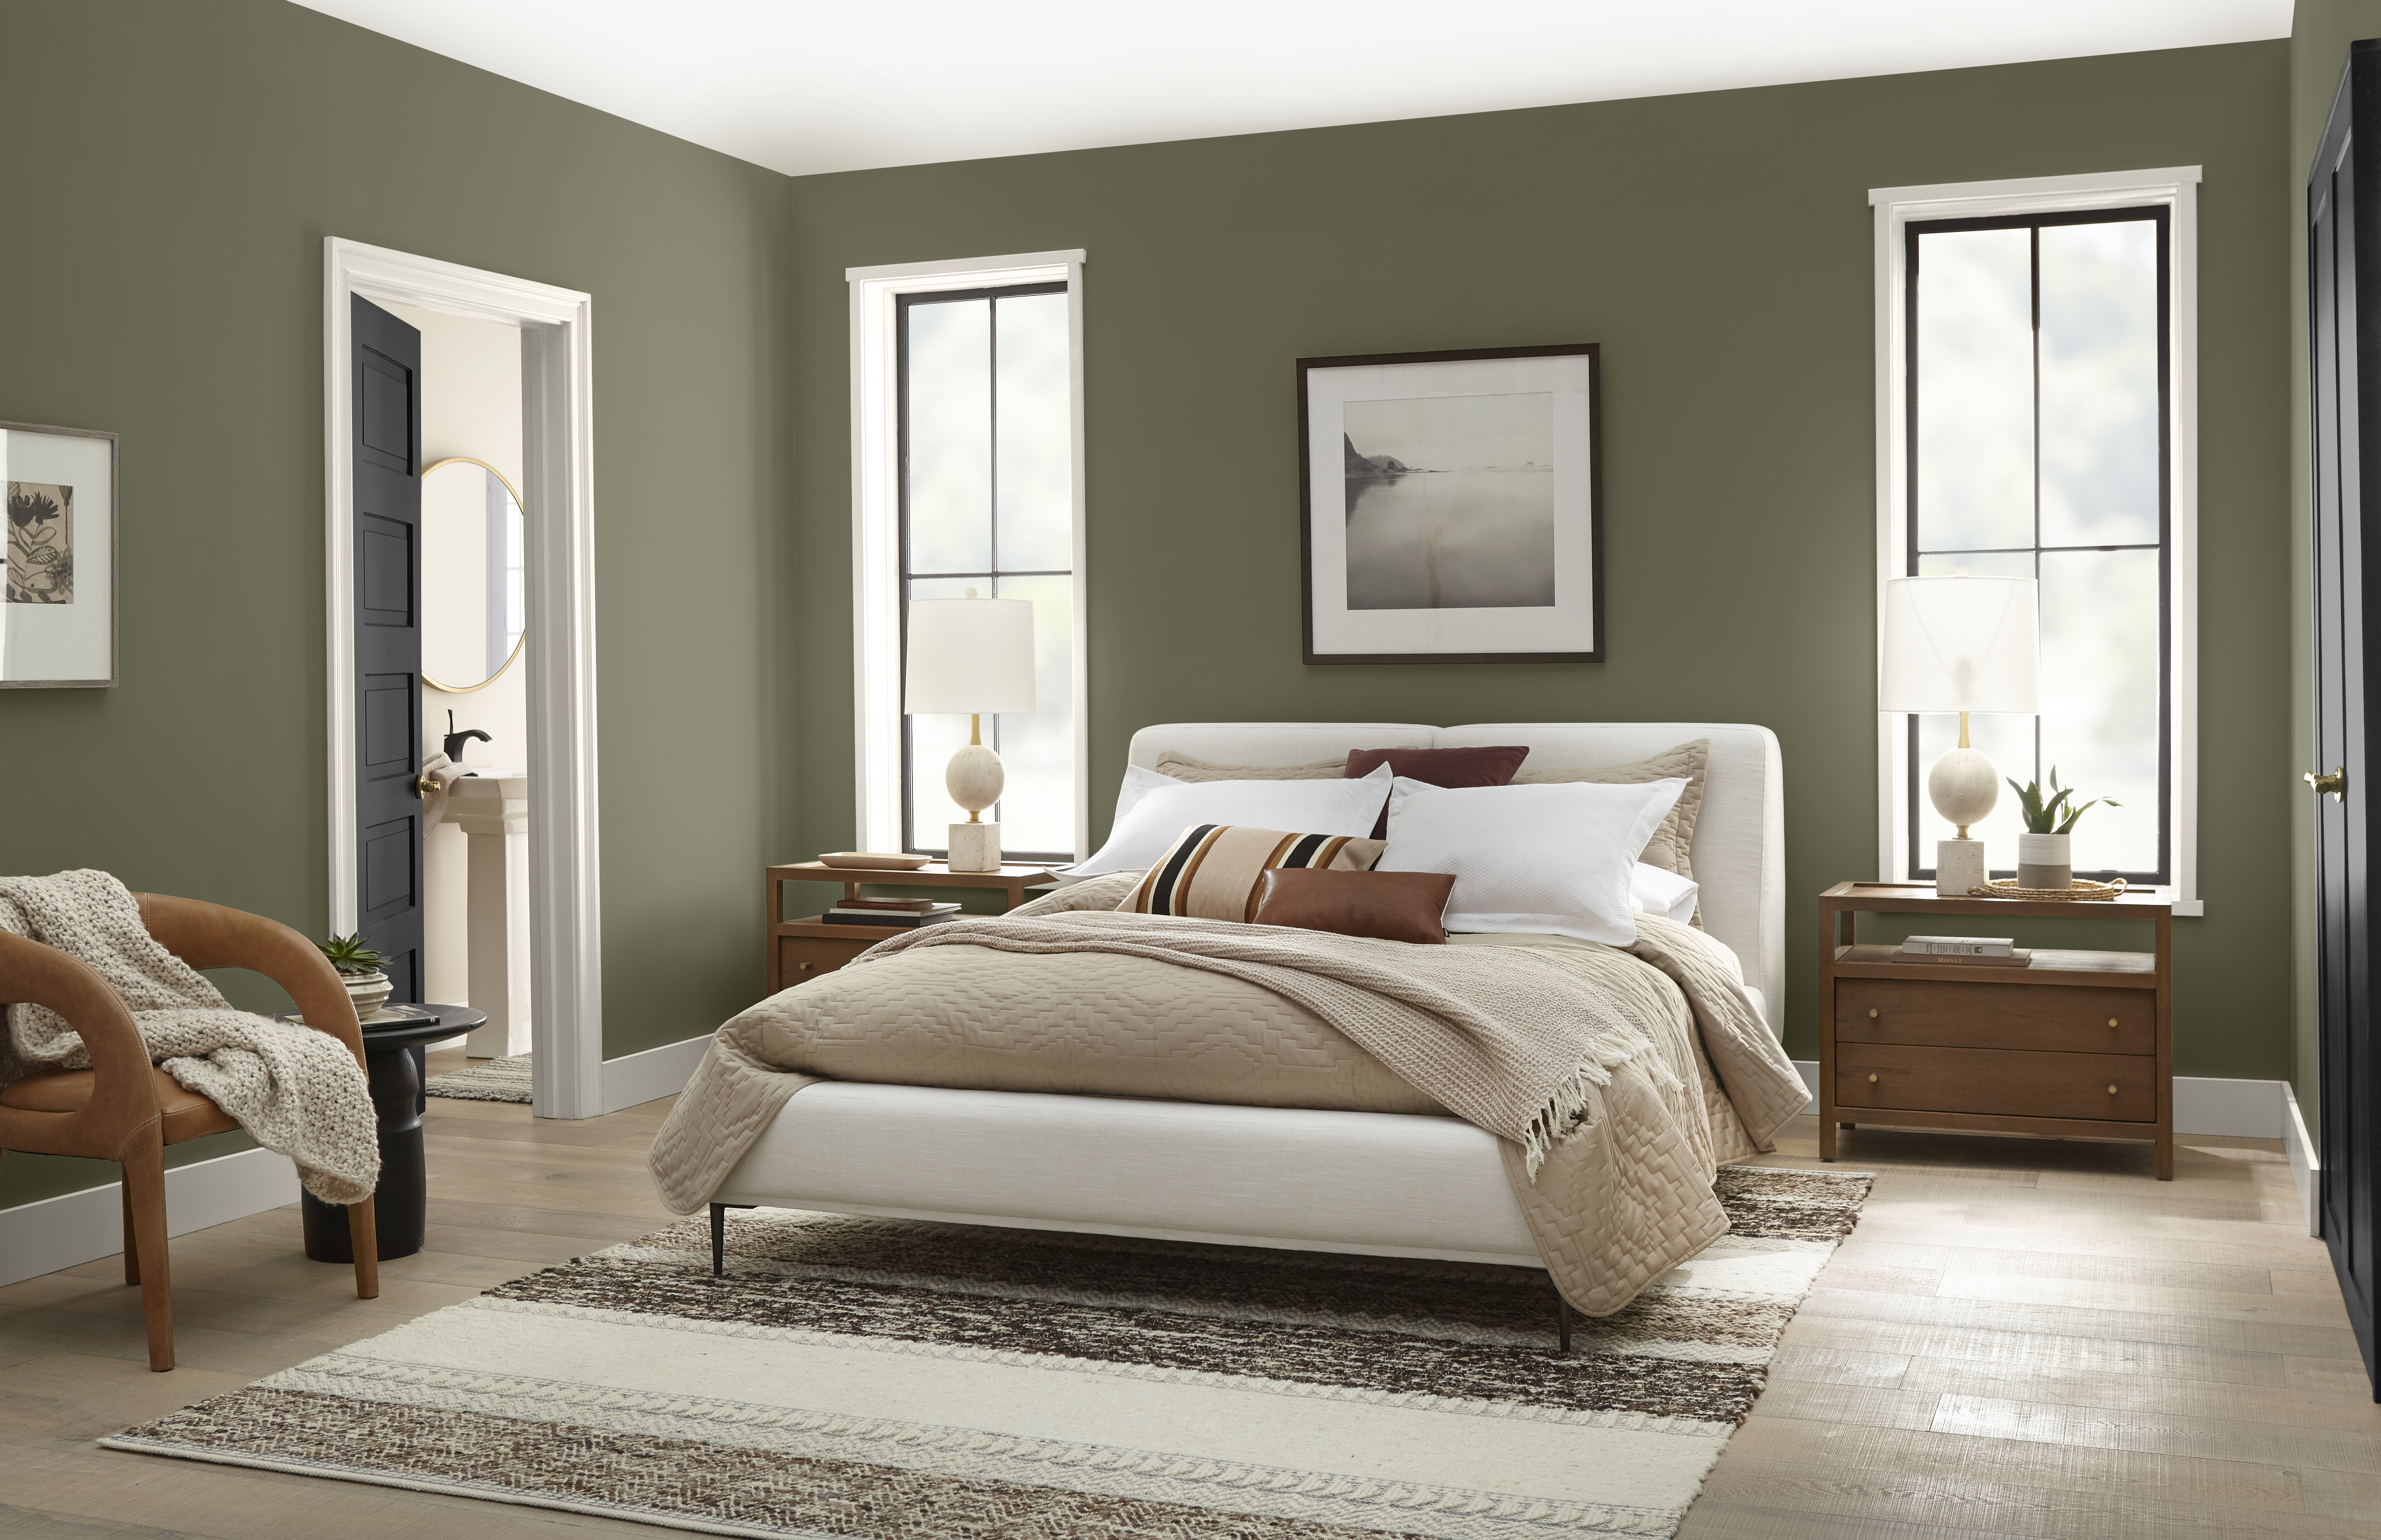 A cozy bedroom with walls painted in warm, dark green colour